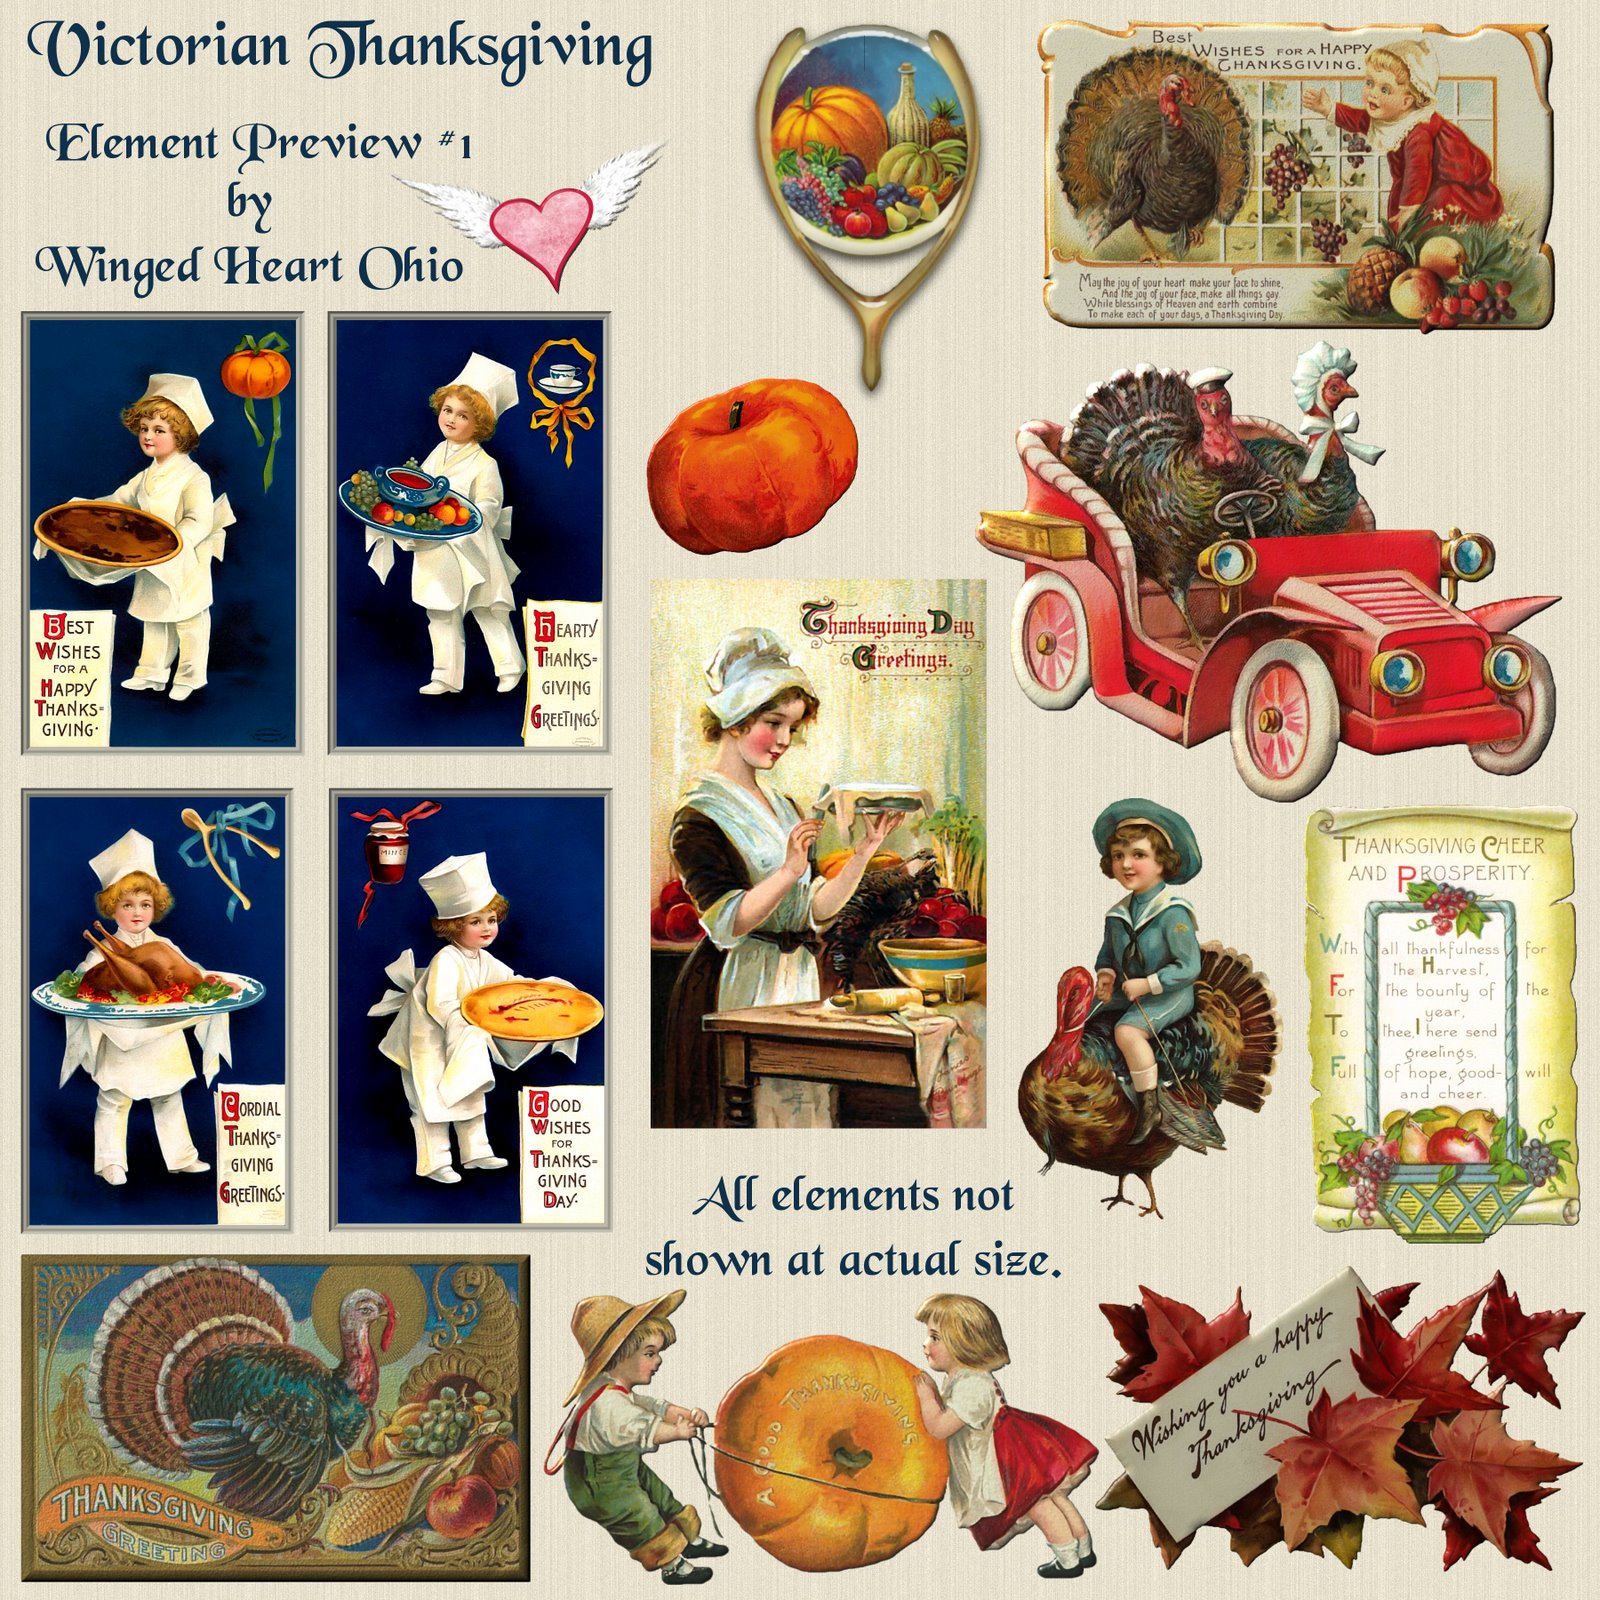 [WH_VictorianThanksgiving_element+preview1.jpg]